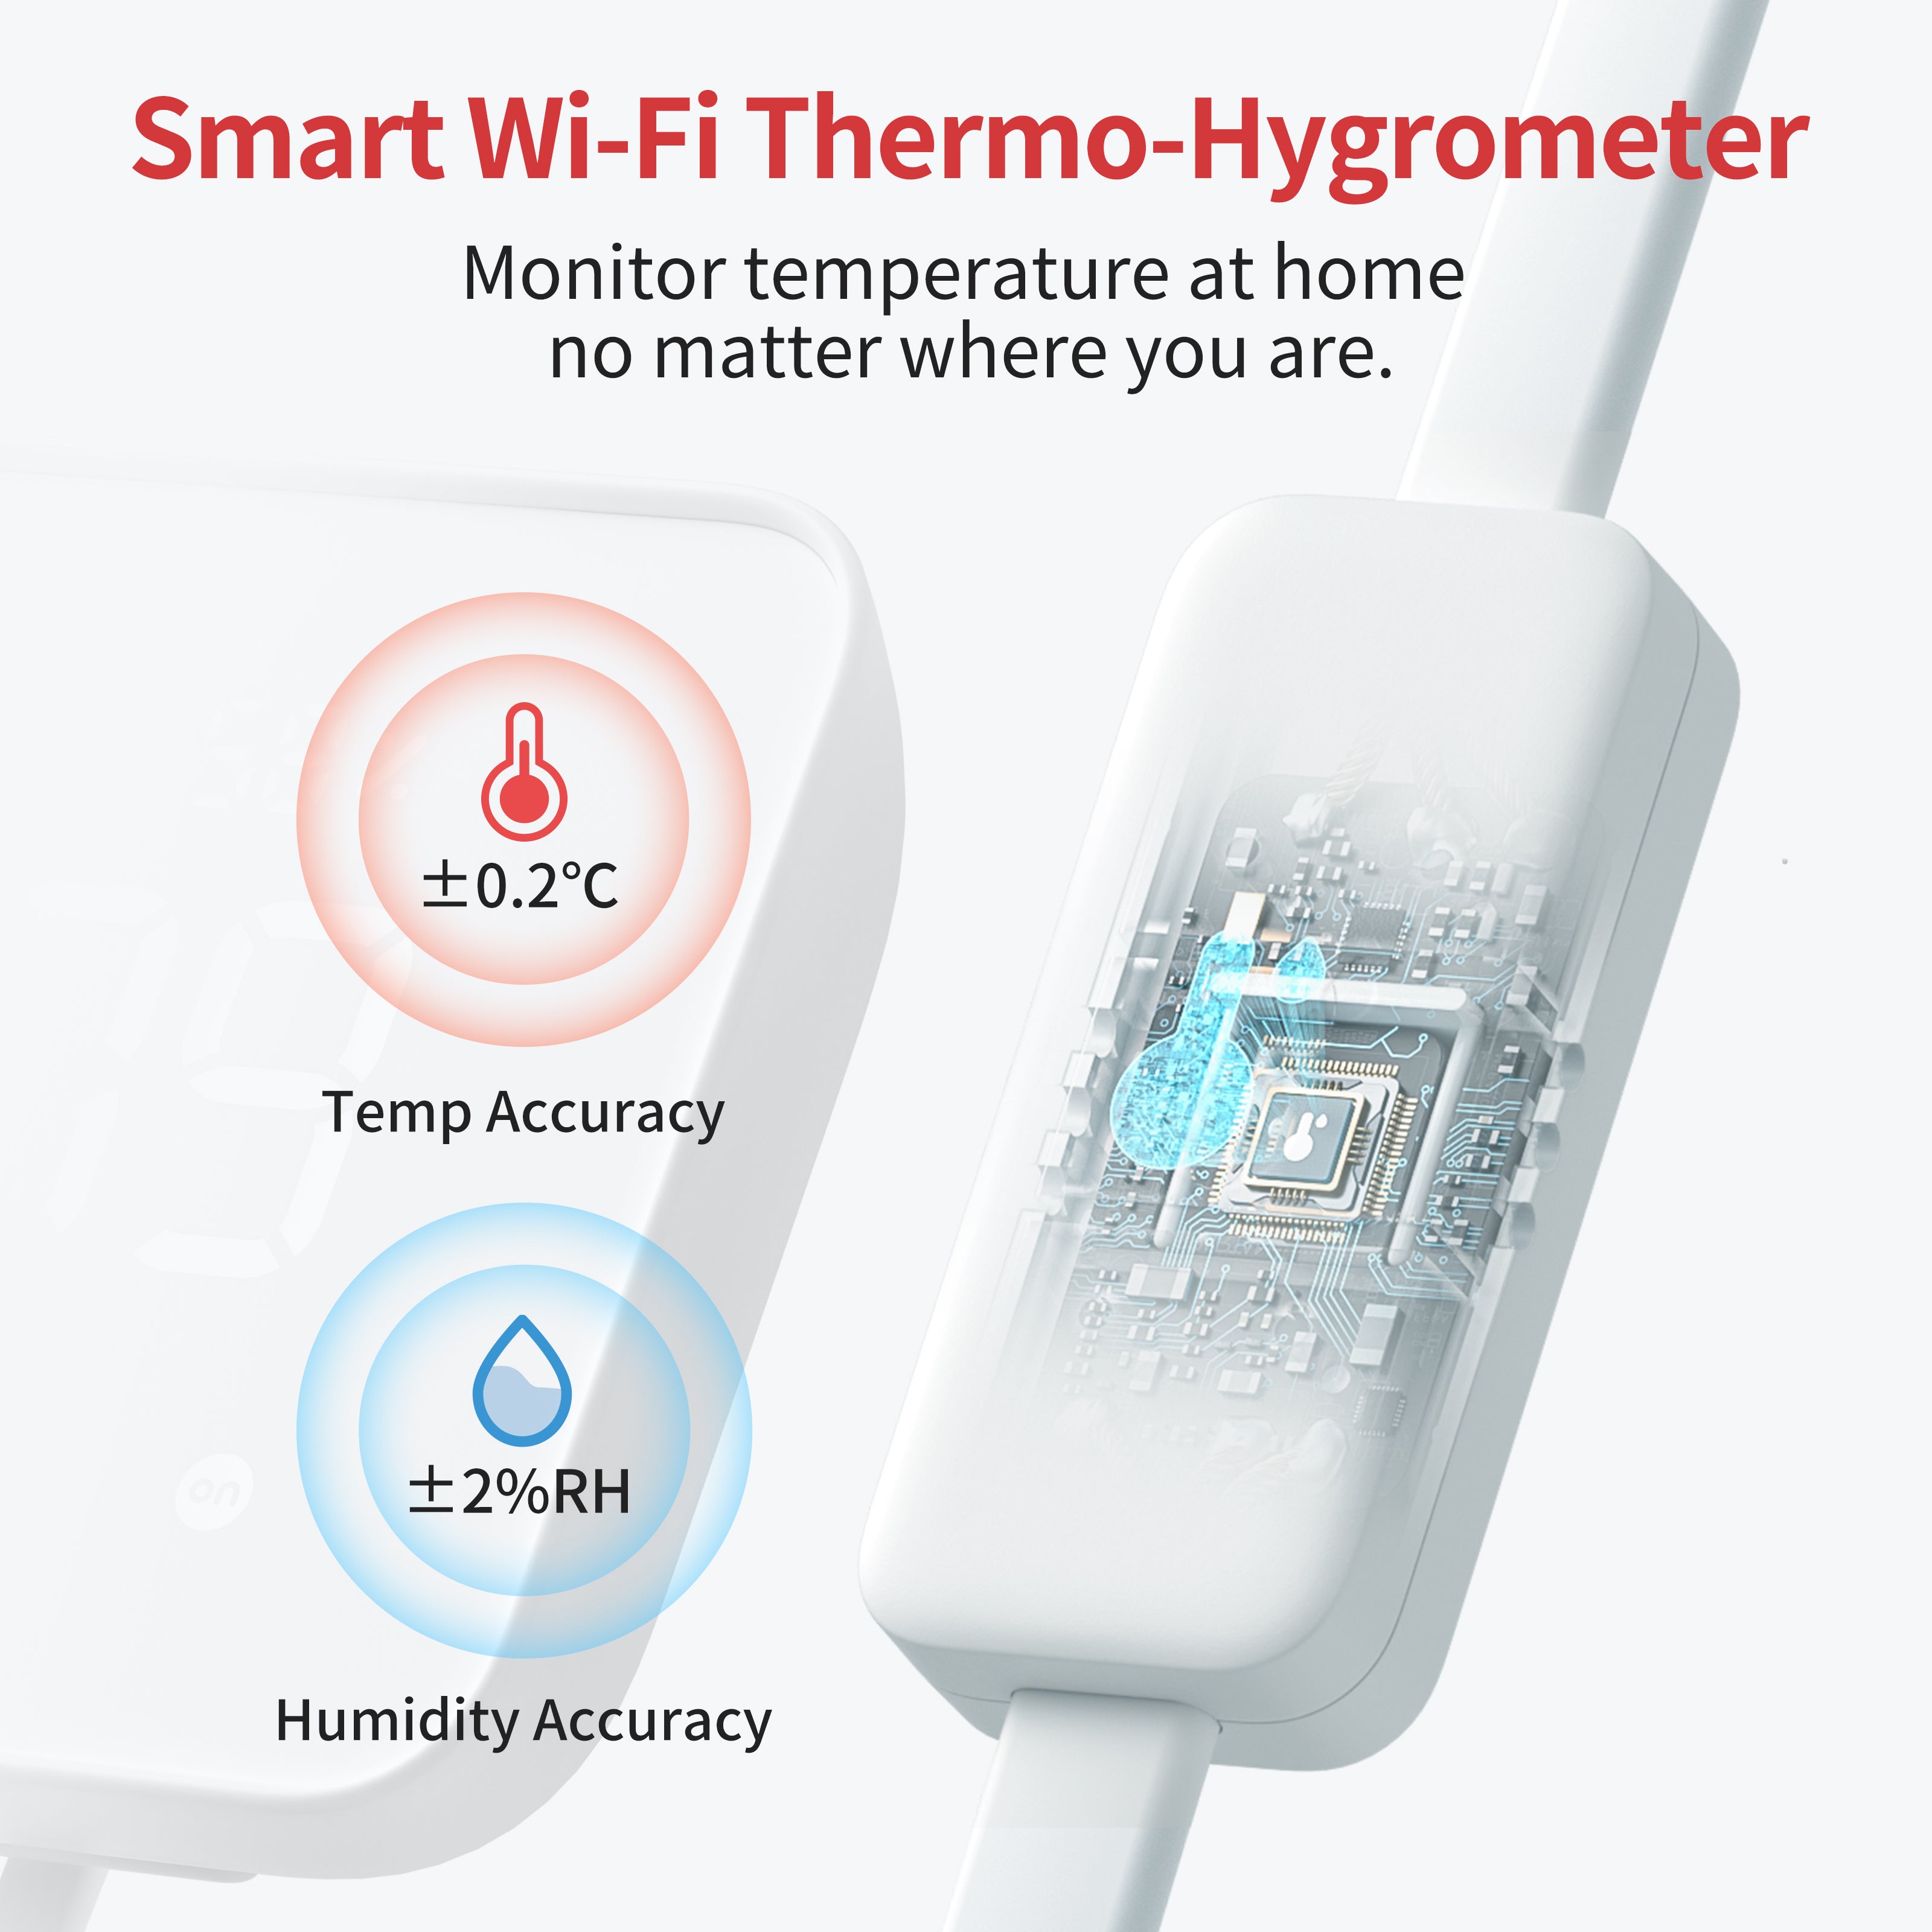 SwitchBot Hub 2 | Work as a WiFi Thermometer Hygrometer, IR Remote Control, Smart Remote and Light Sensor, Link SwitchBot to Wi-Fi (Support 2.4GHz), Compatible with Alexa&Google Assistant